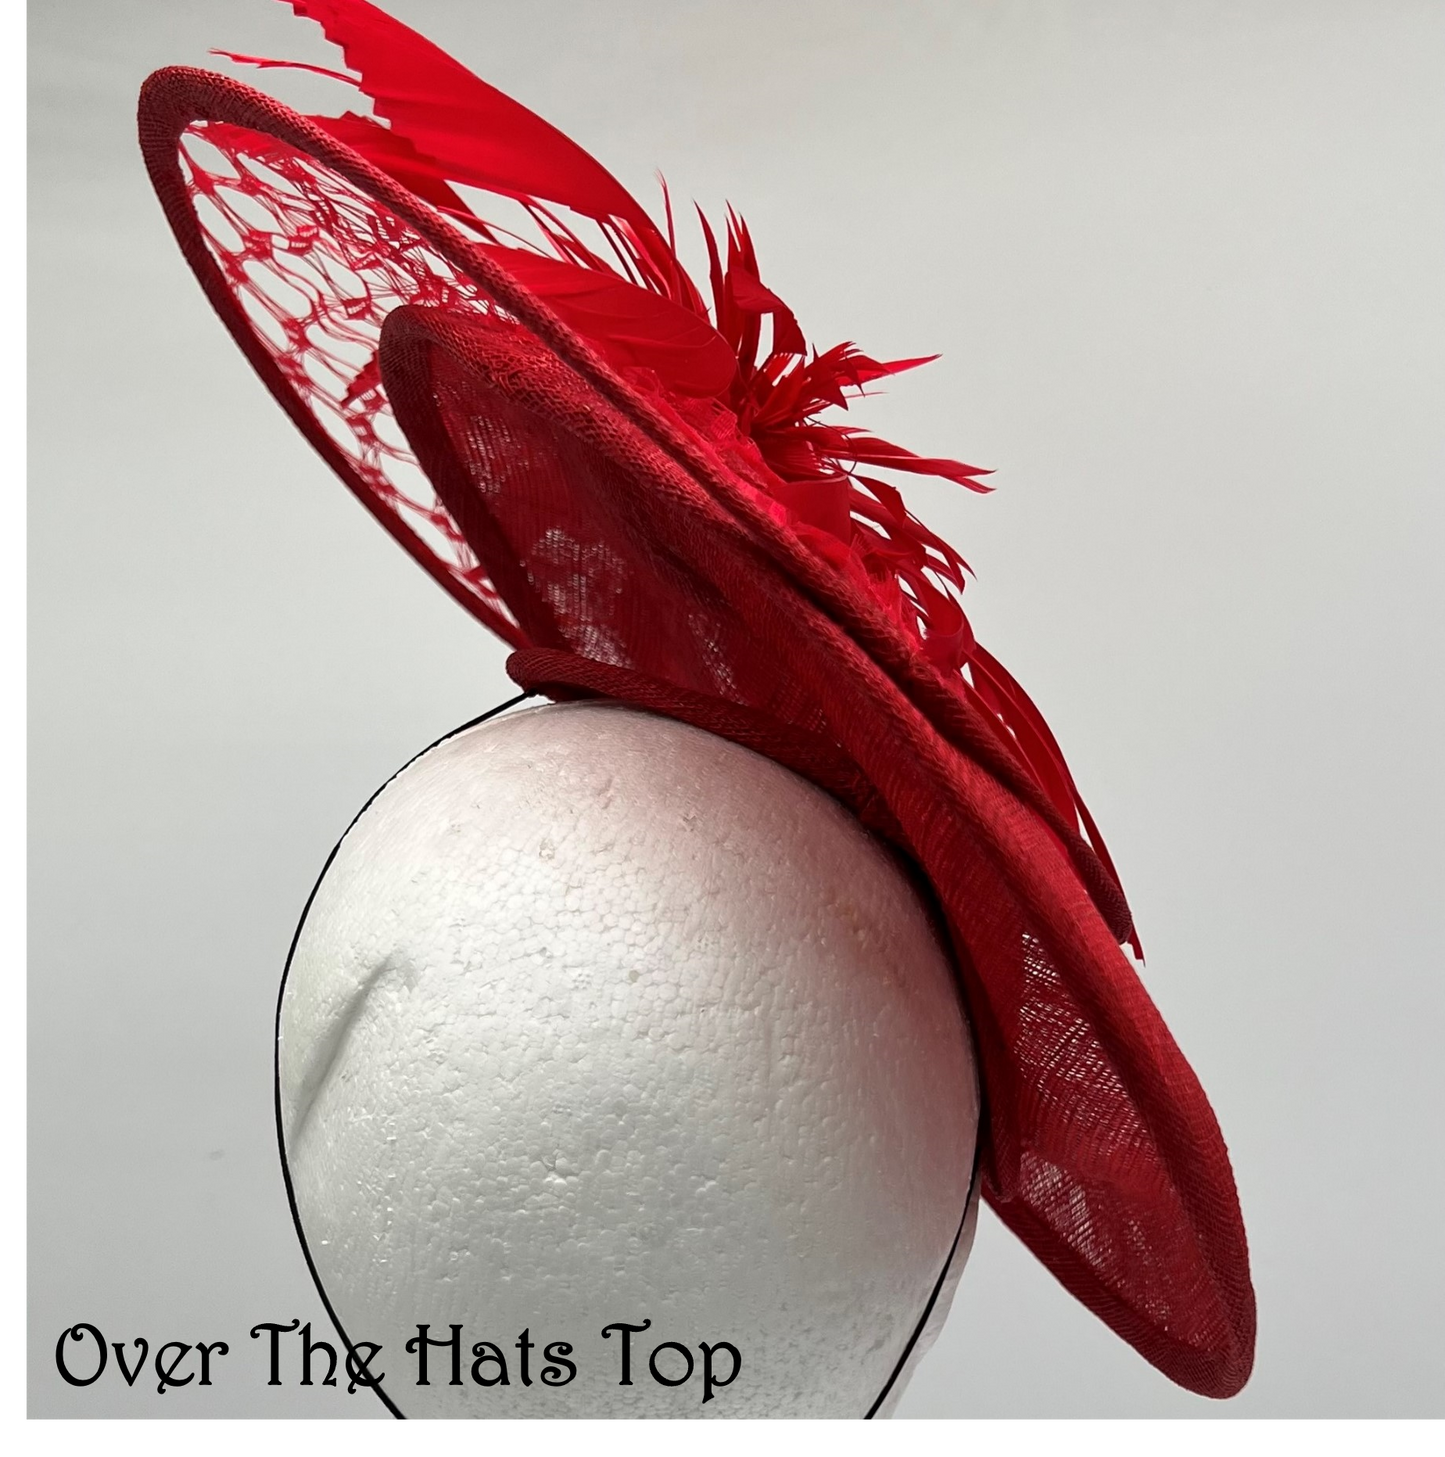 Red Saucer Hat with Feathers and Netting, Great For Derby, Ascot, Church and Garden Party